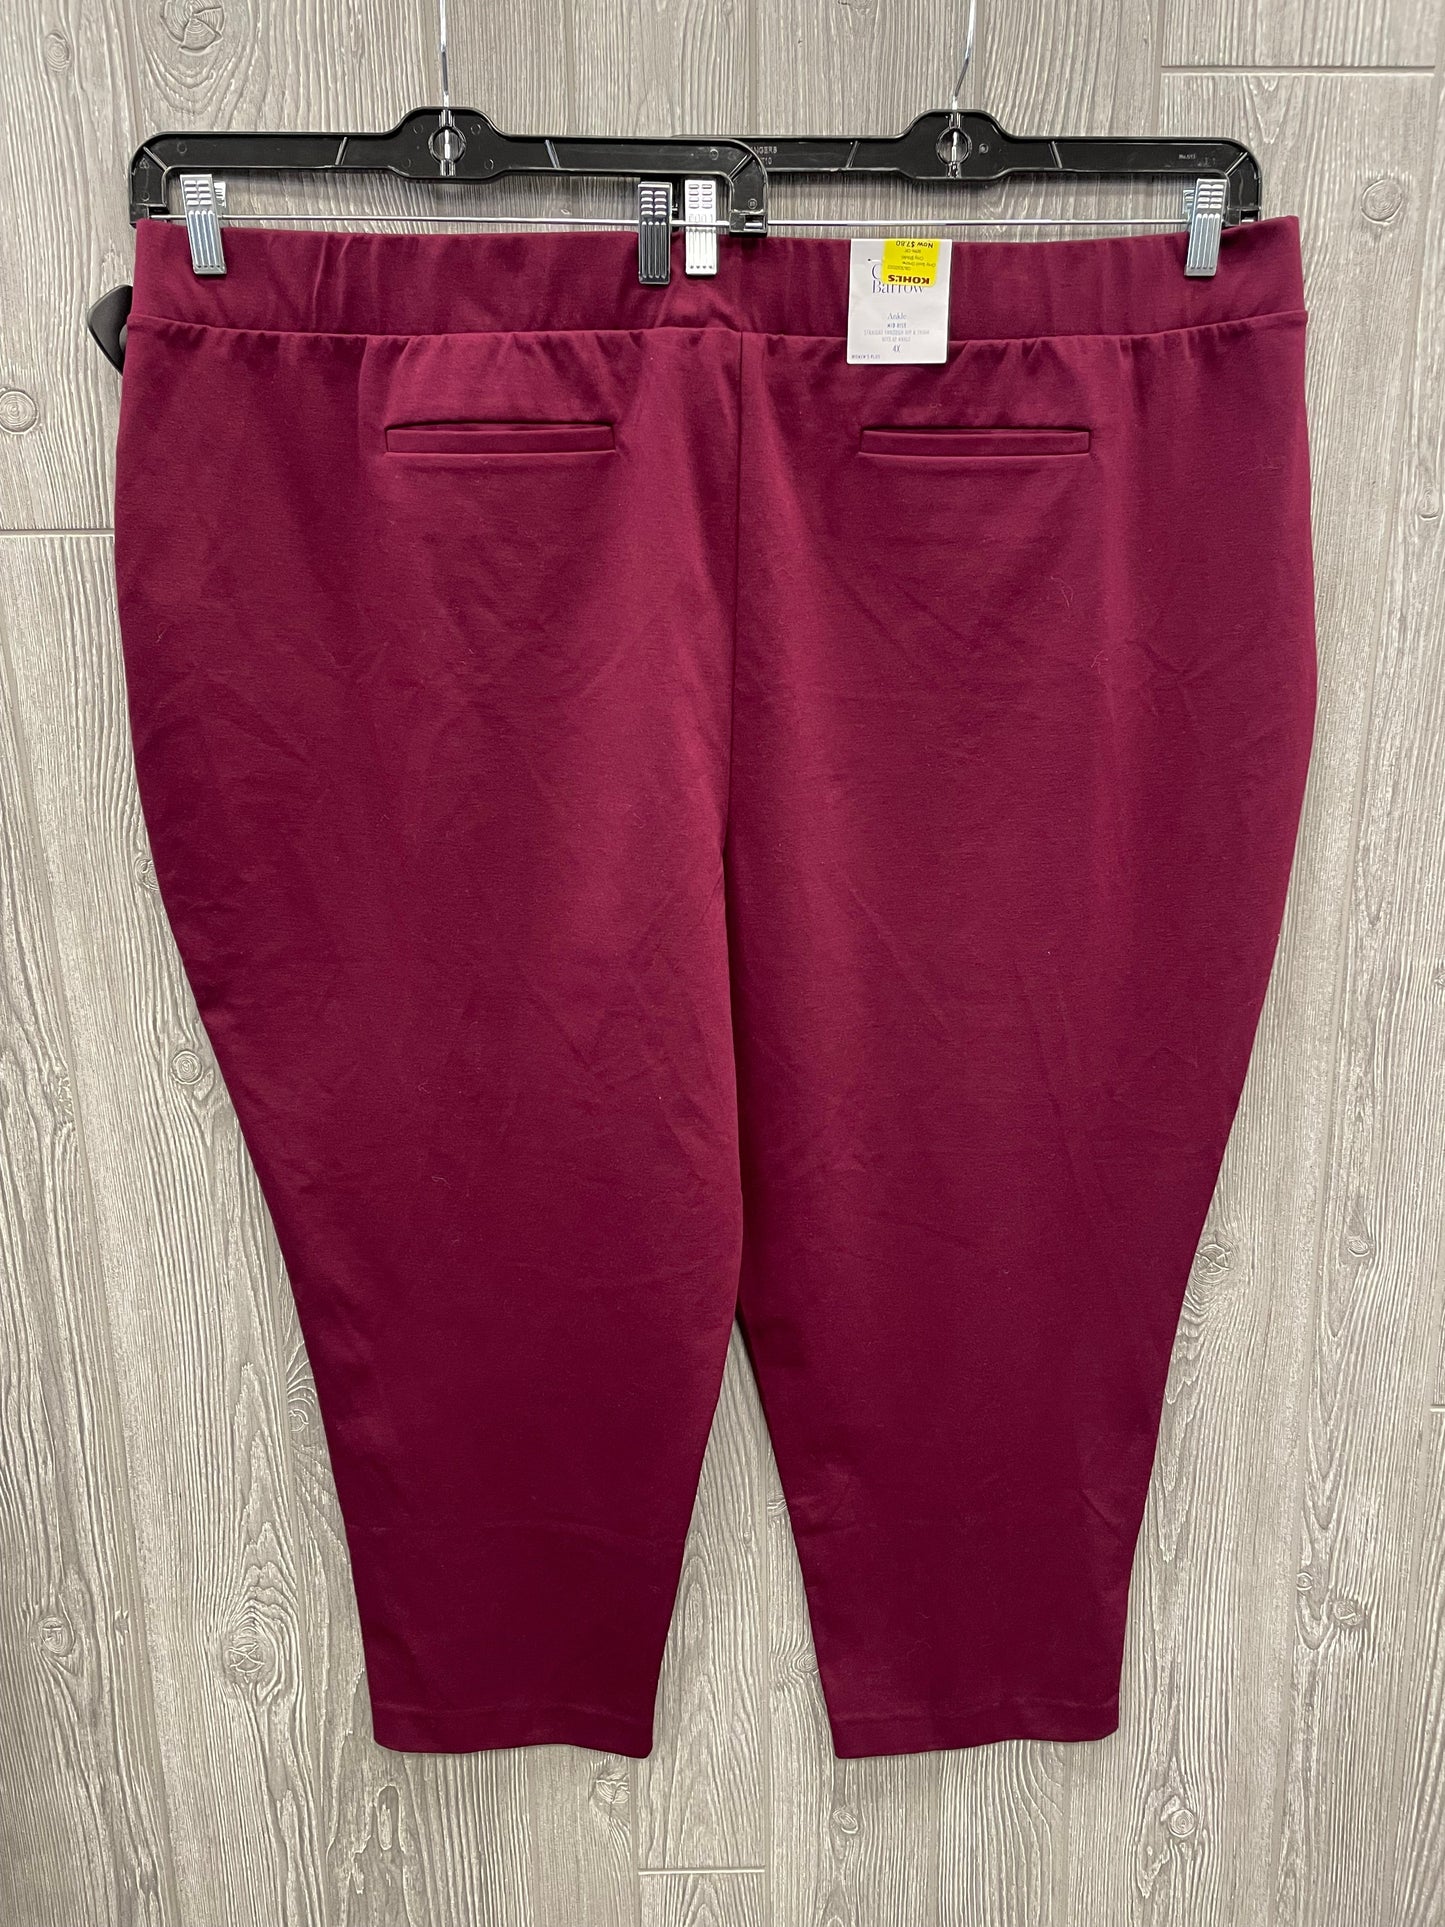 Pants Ankle By Croft And Barrow  Size: 24